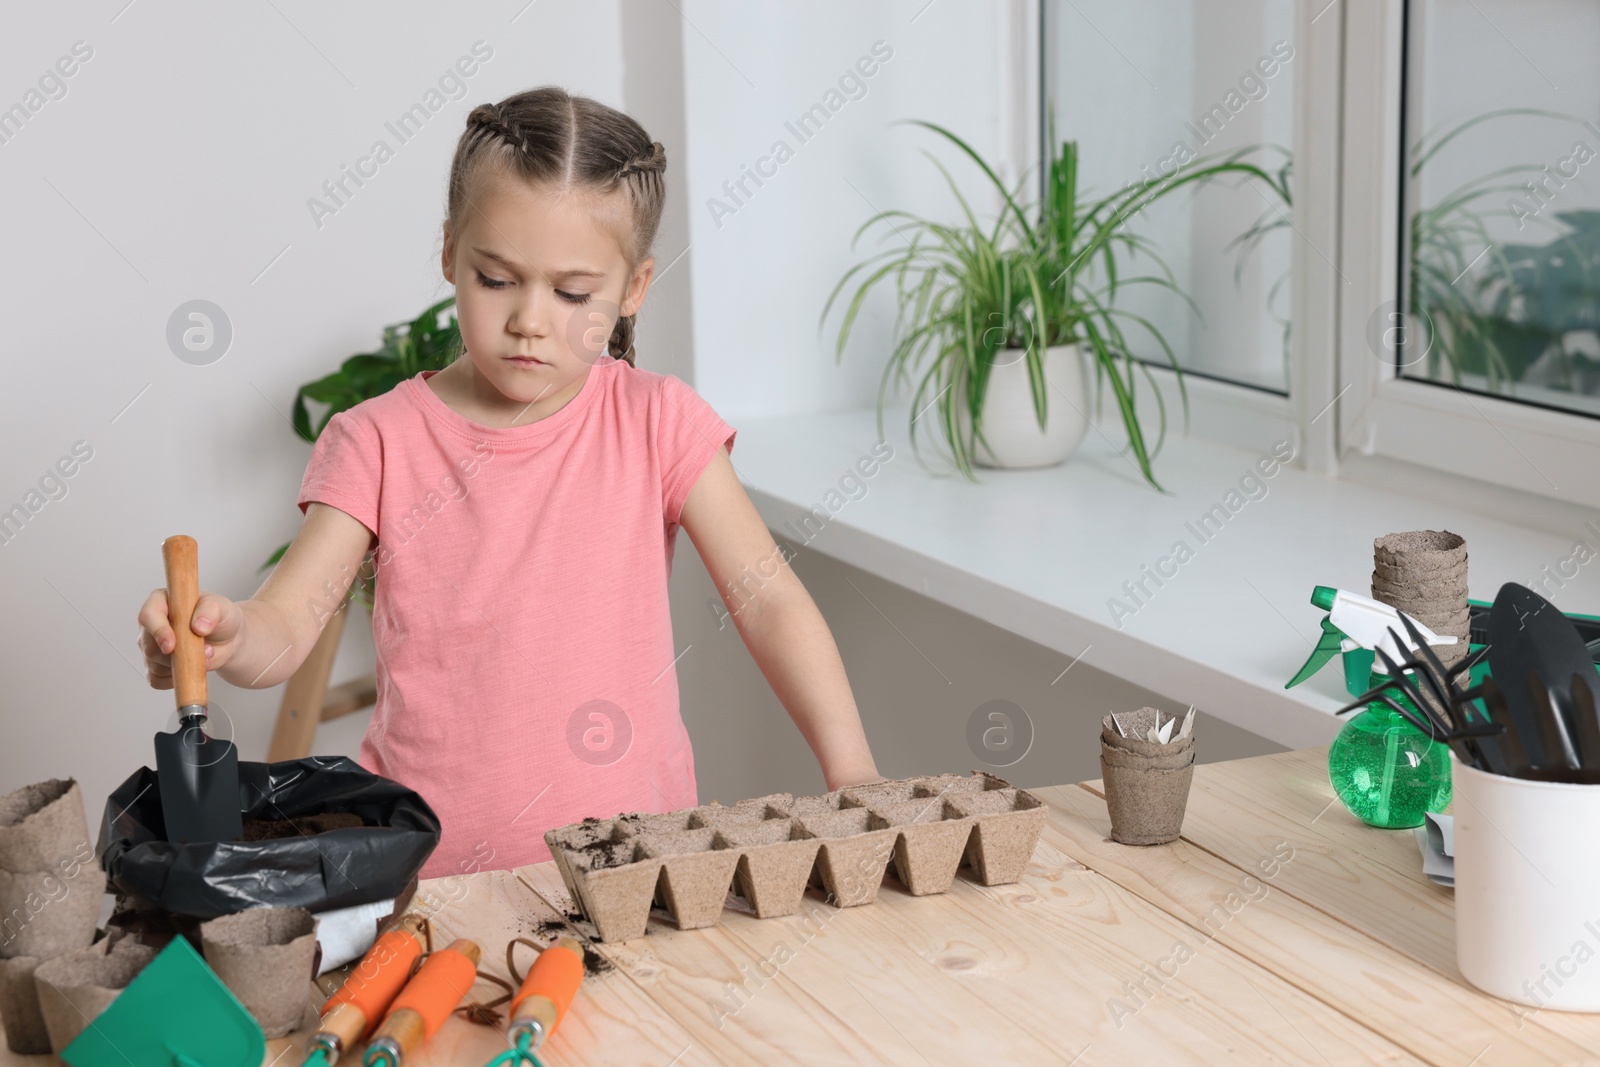 Photo of Little girl adding soil into peat pots at wooden table in room. Growing vegetable seeds